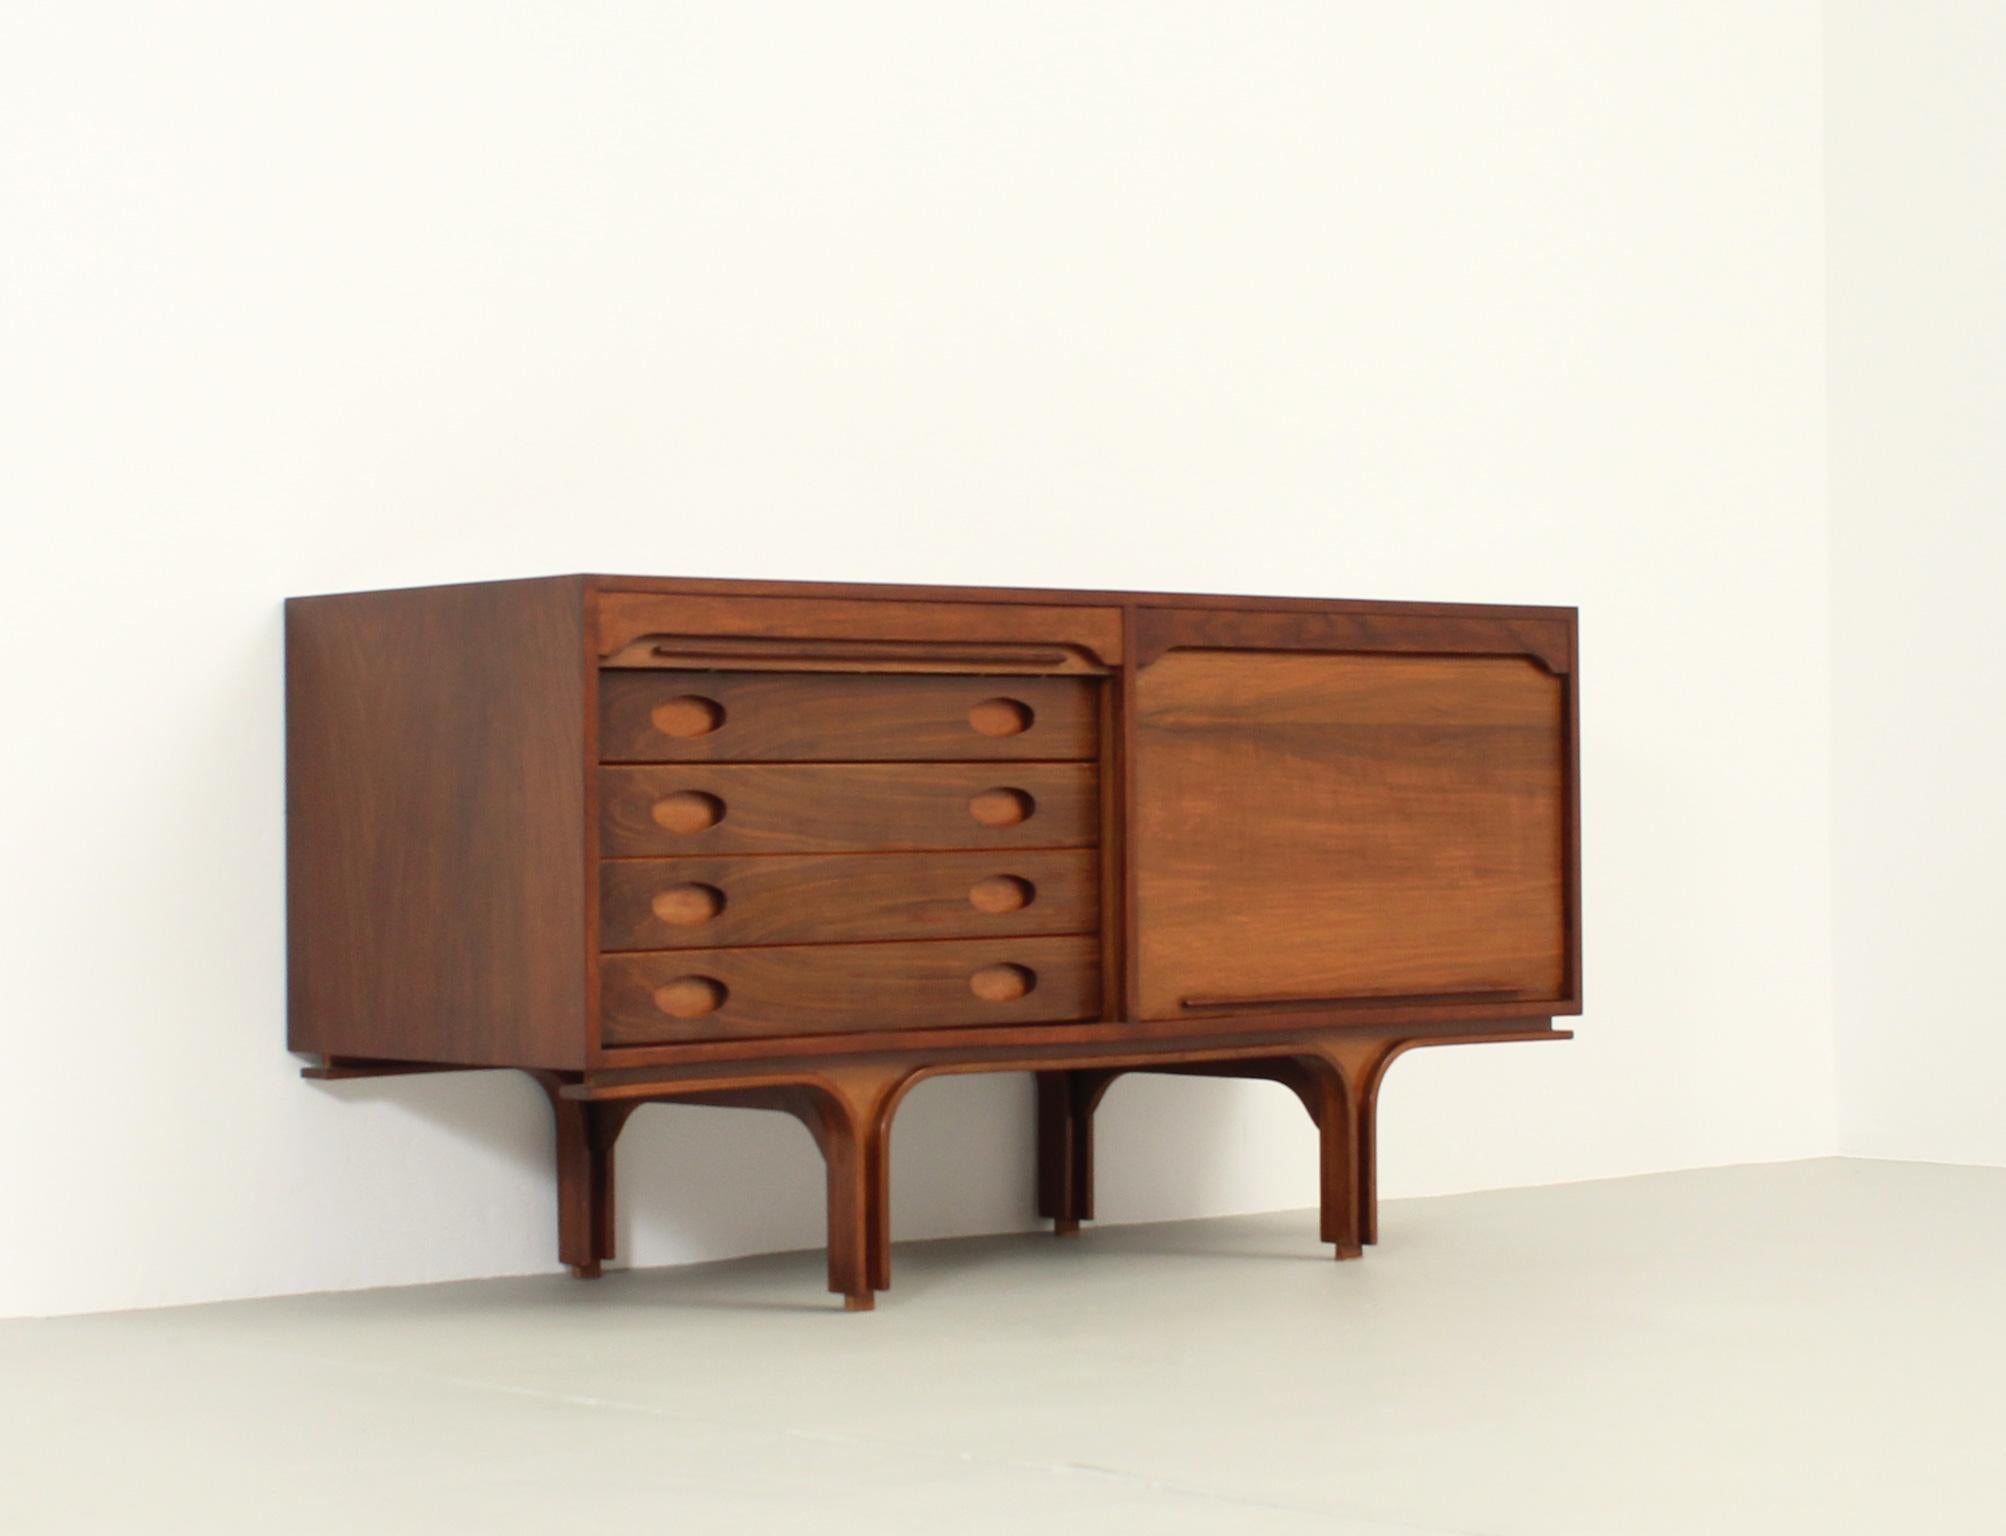 Sideboard with tambour doors designed in 1957 by Gianfranco Frattini for Bernini, Italy. Walnut wood. Four drawers and one spaces with shelves. This sideboard can be matched with another larger one.